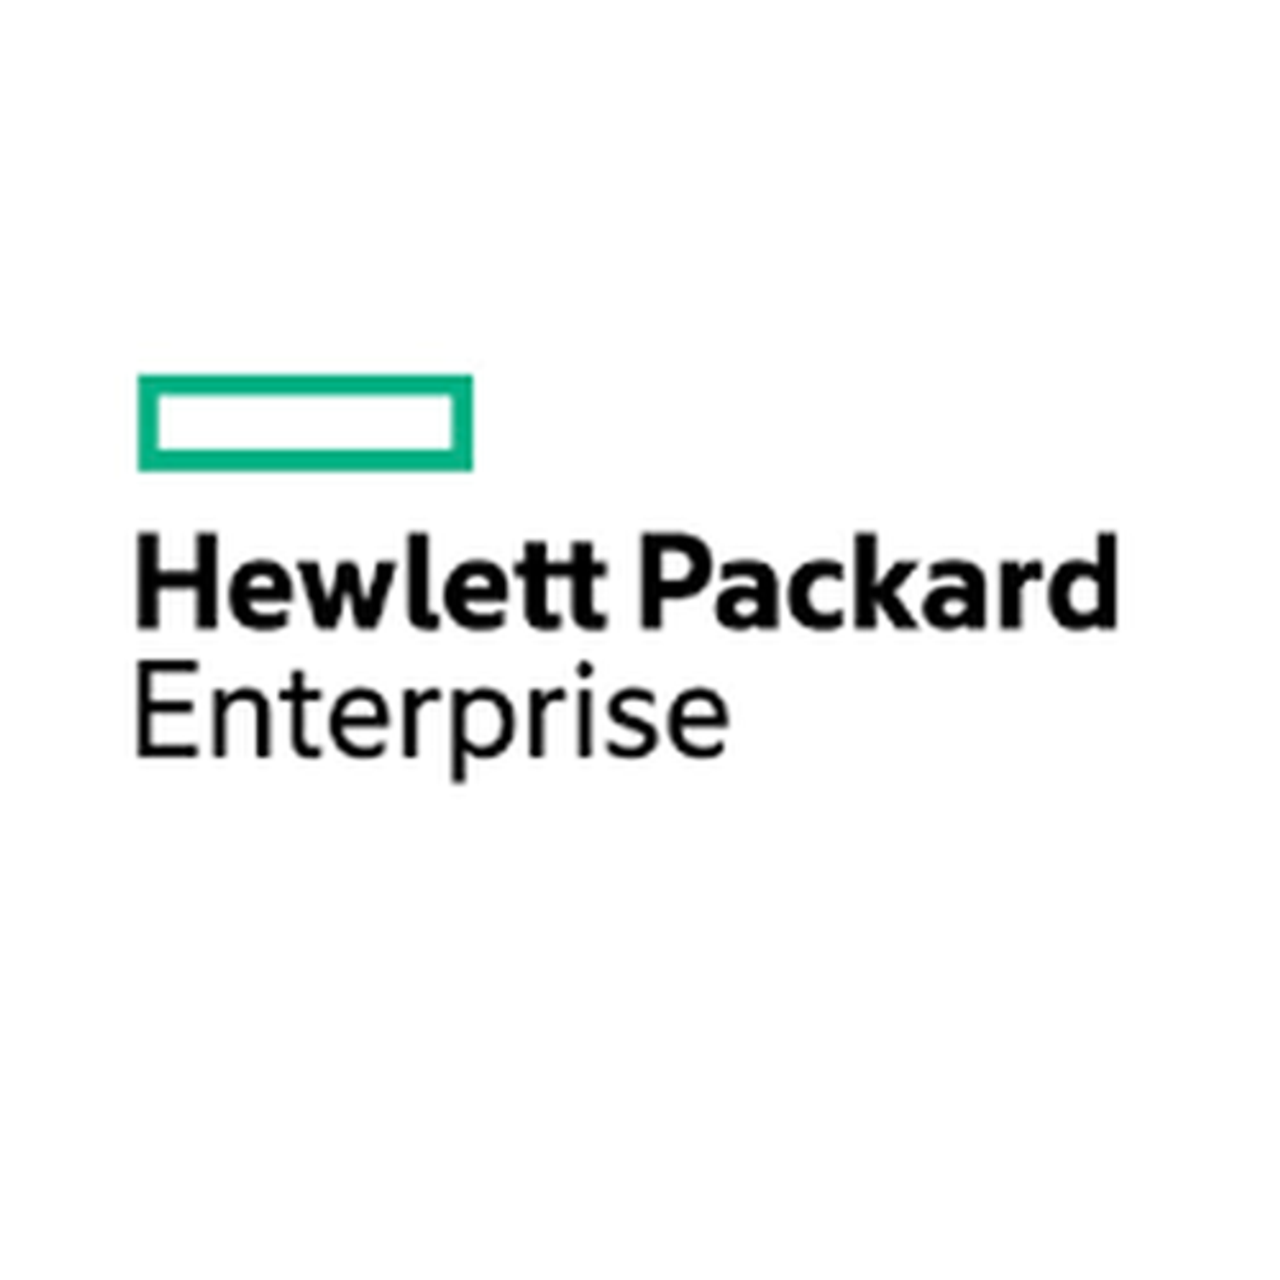 HPE 800W FS Plat Ht Power Supply Reman Kit (Sourcing) - HPE Discontinued Product)